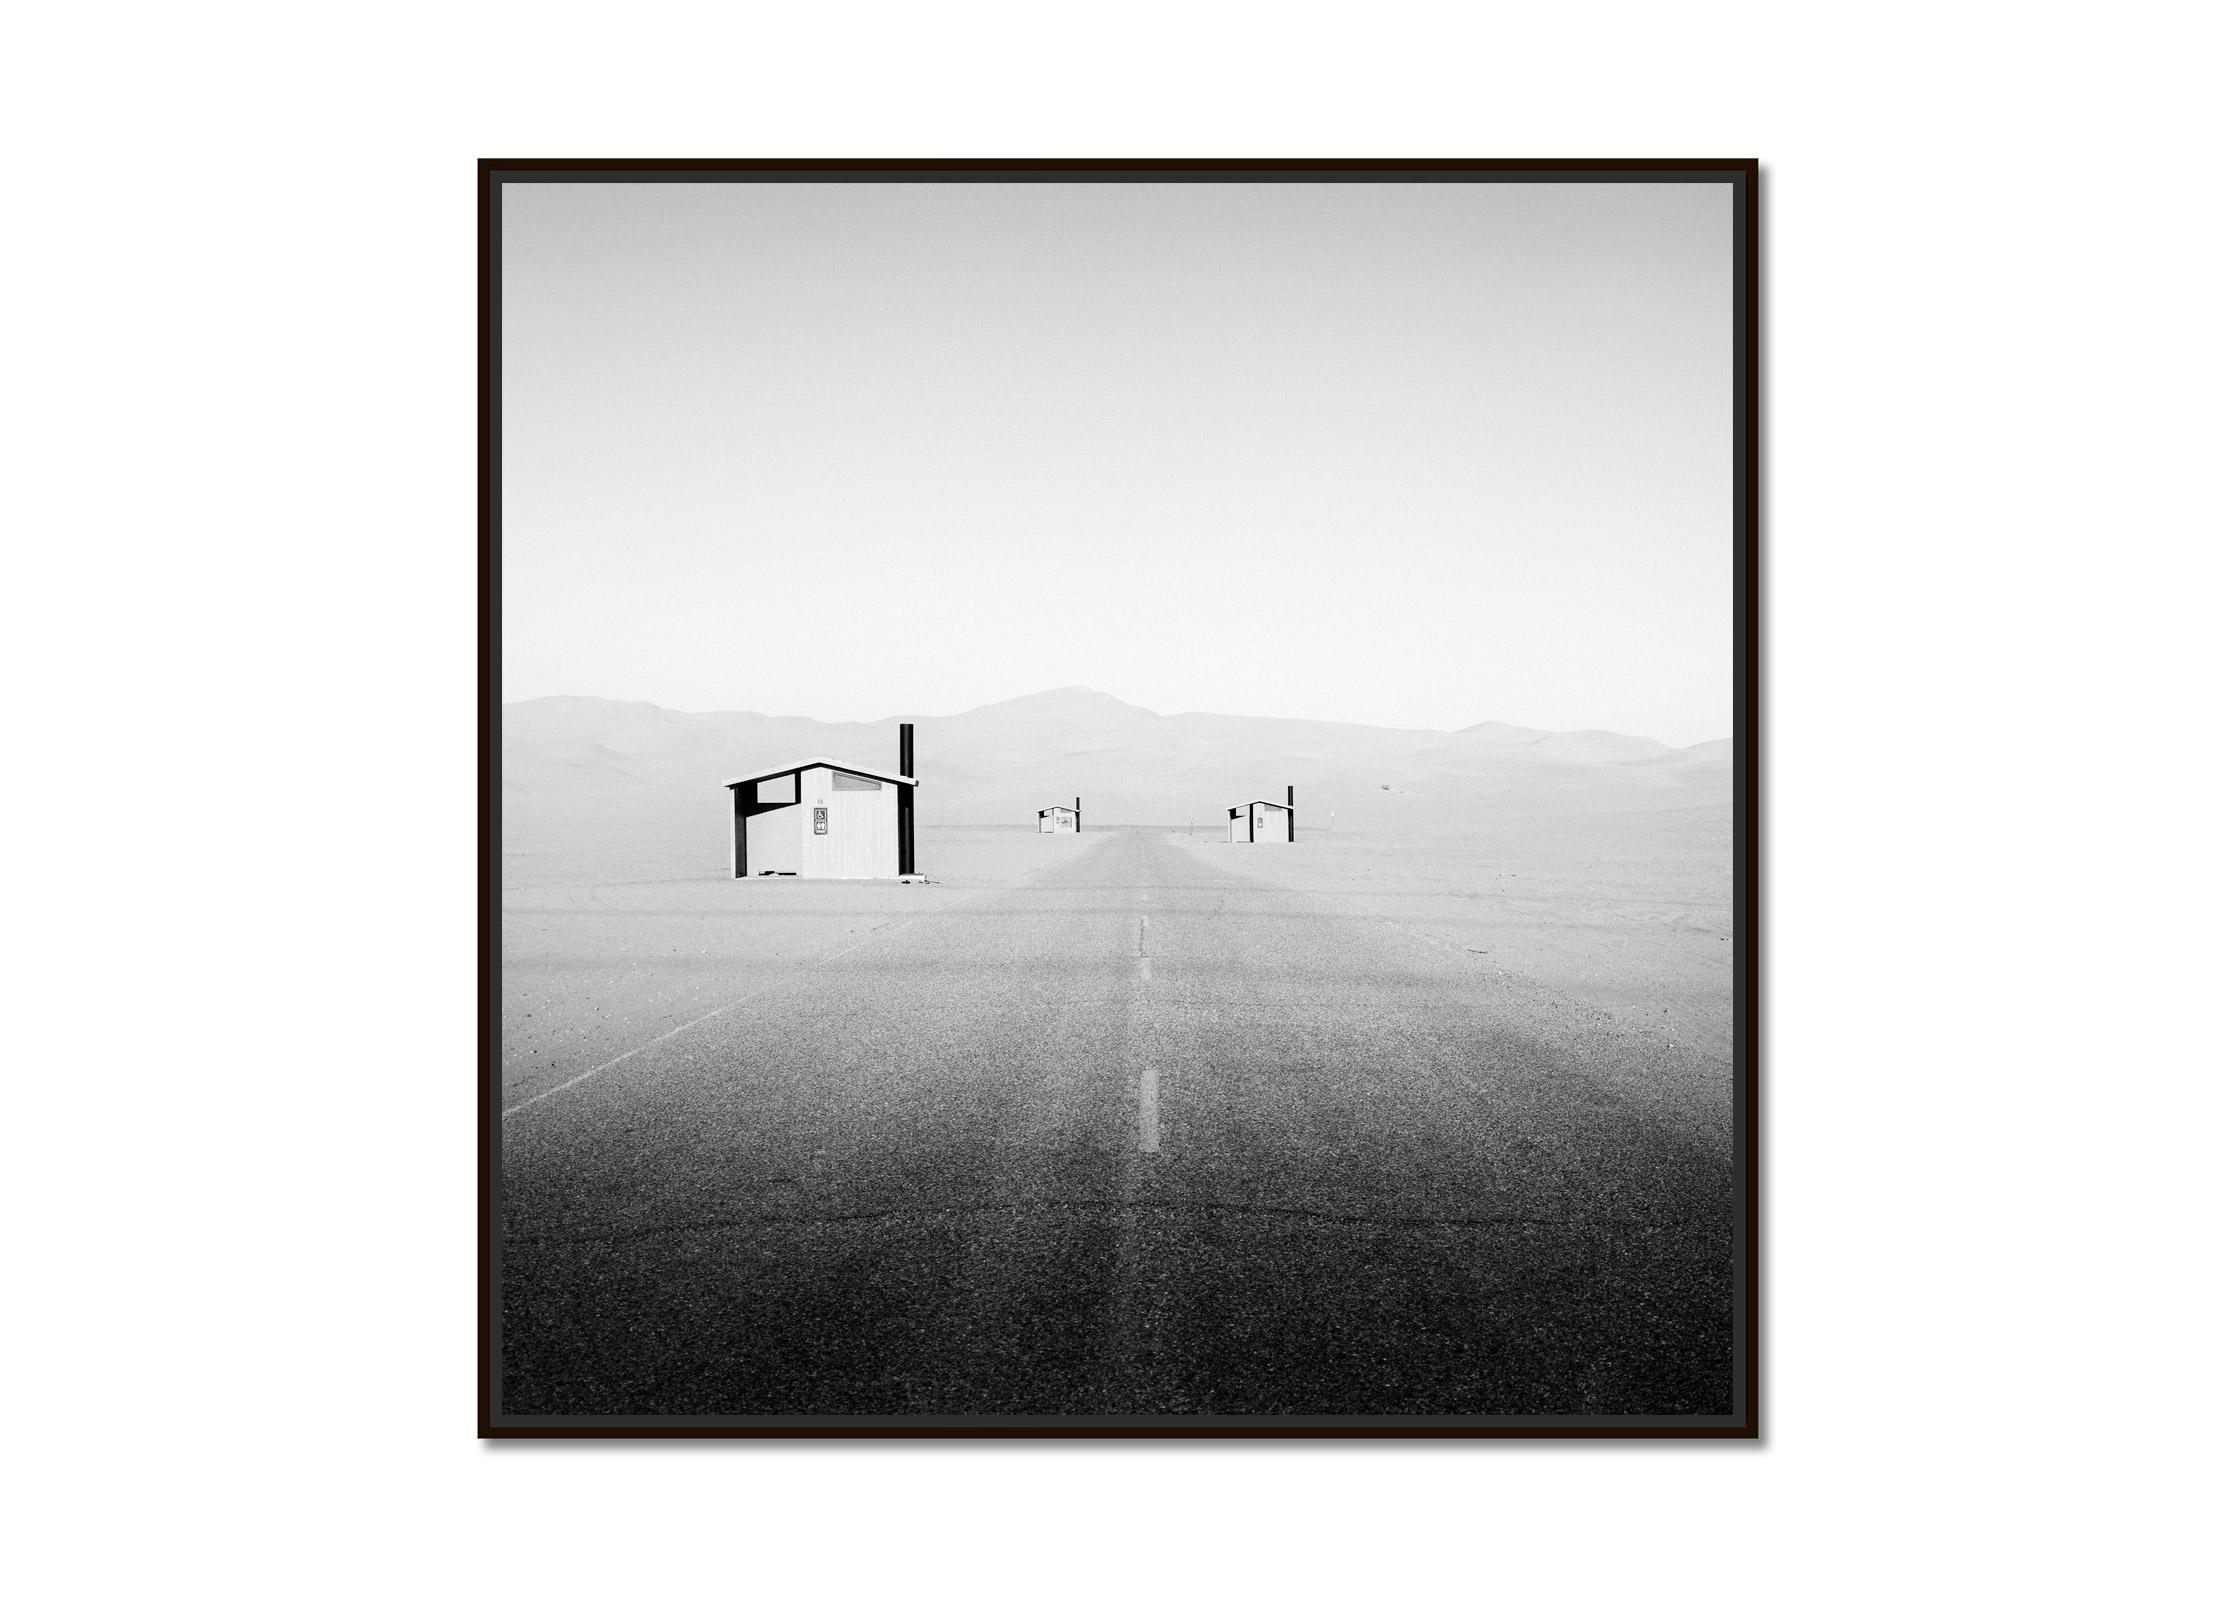 Mexican Border, Camping, Arizona, USA, black and white landscape art photography - Photograph by Gerald Berghammer